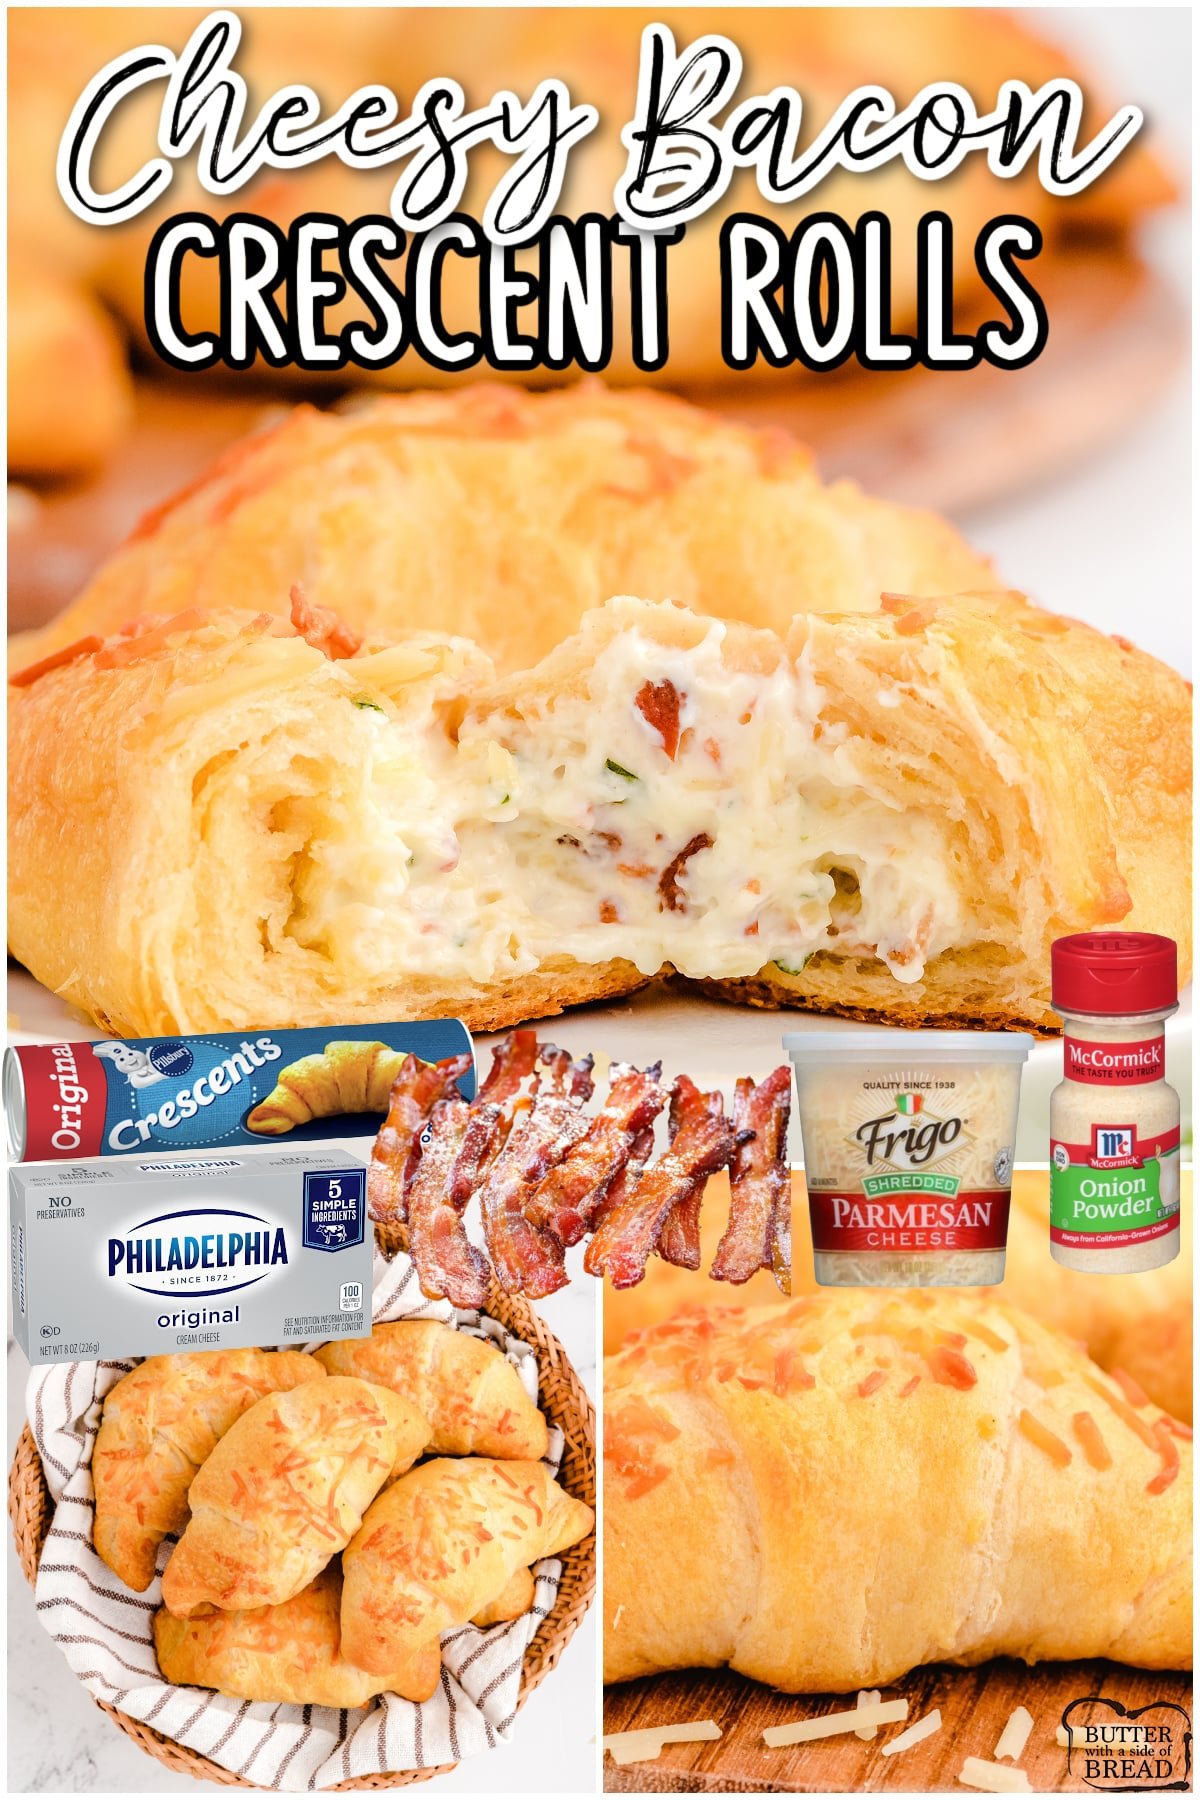 Cheesy Bacon Crescents made with a handful of ingredients & perfect savory bread to serve alongside dinner or as an appetizer! Cheesy bacon crescent rolls made & devoured in minutes!